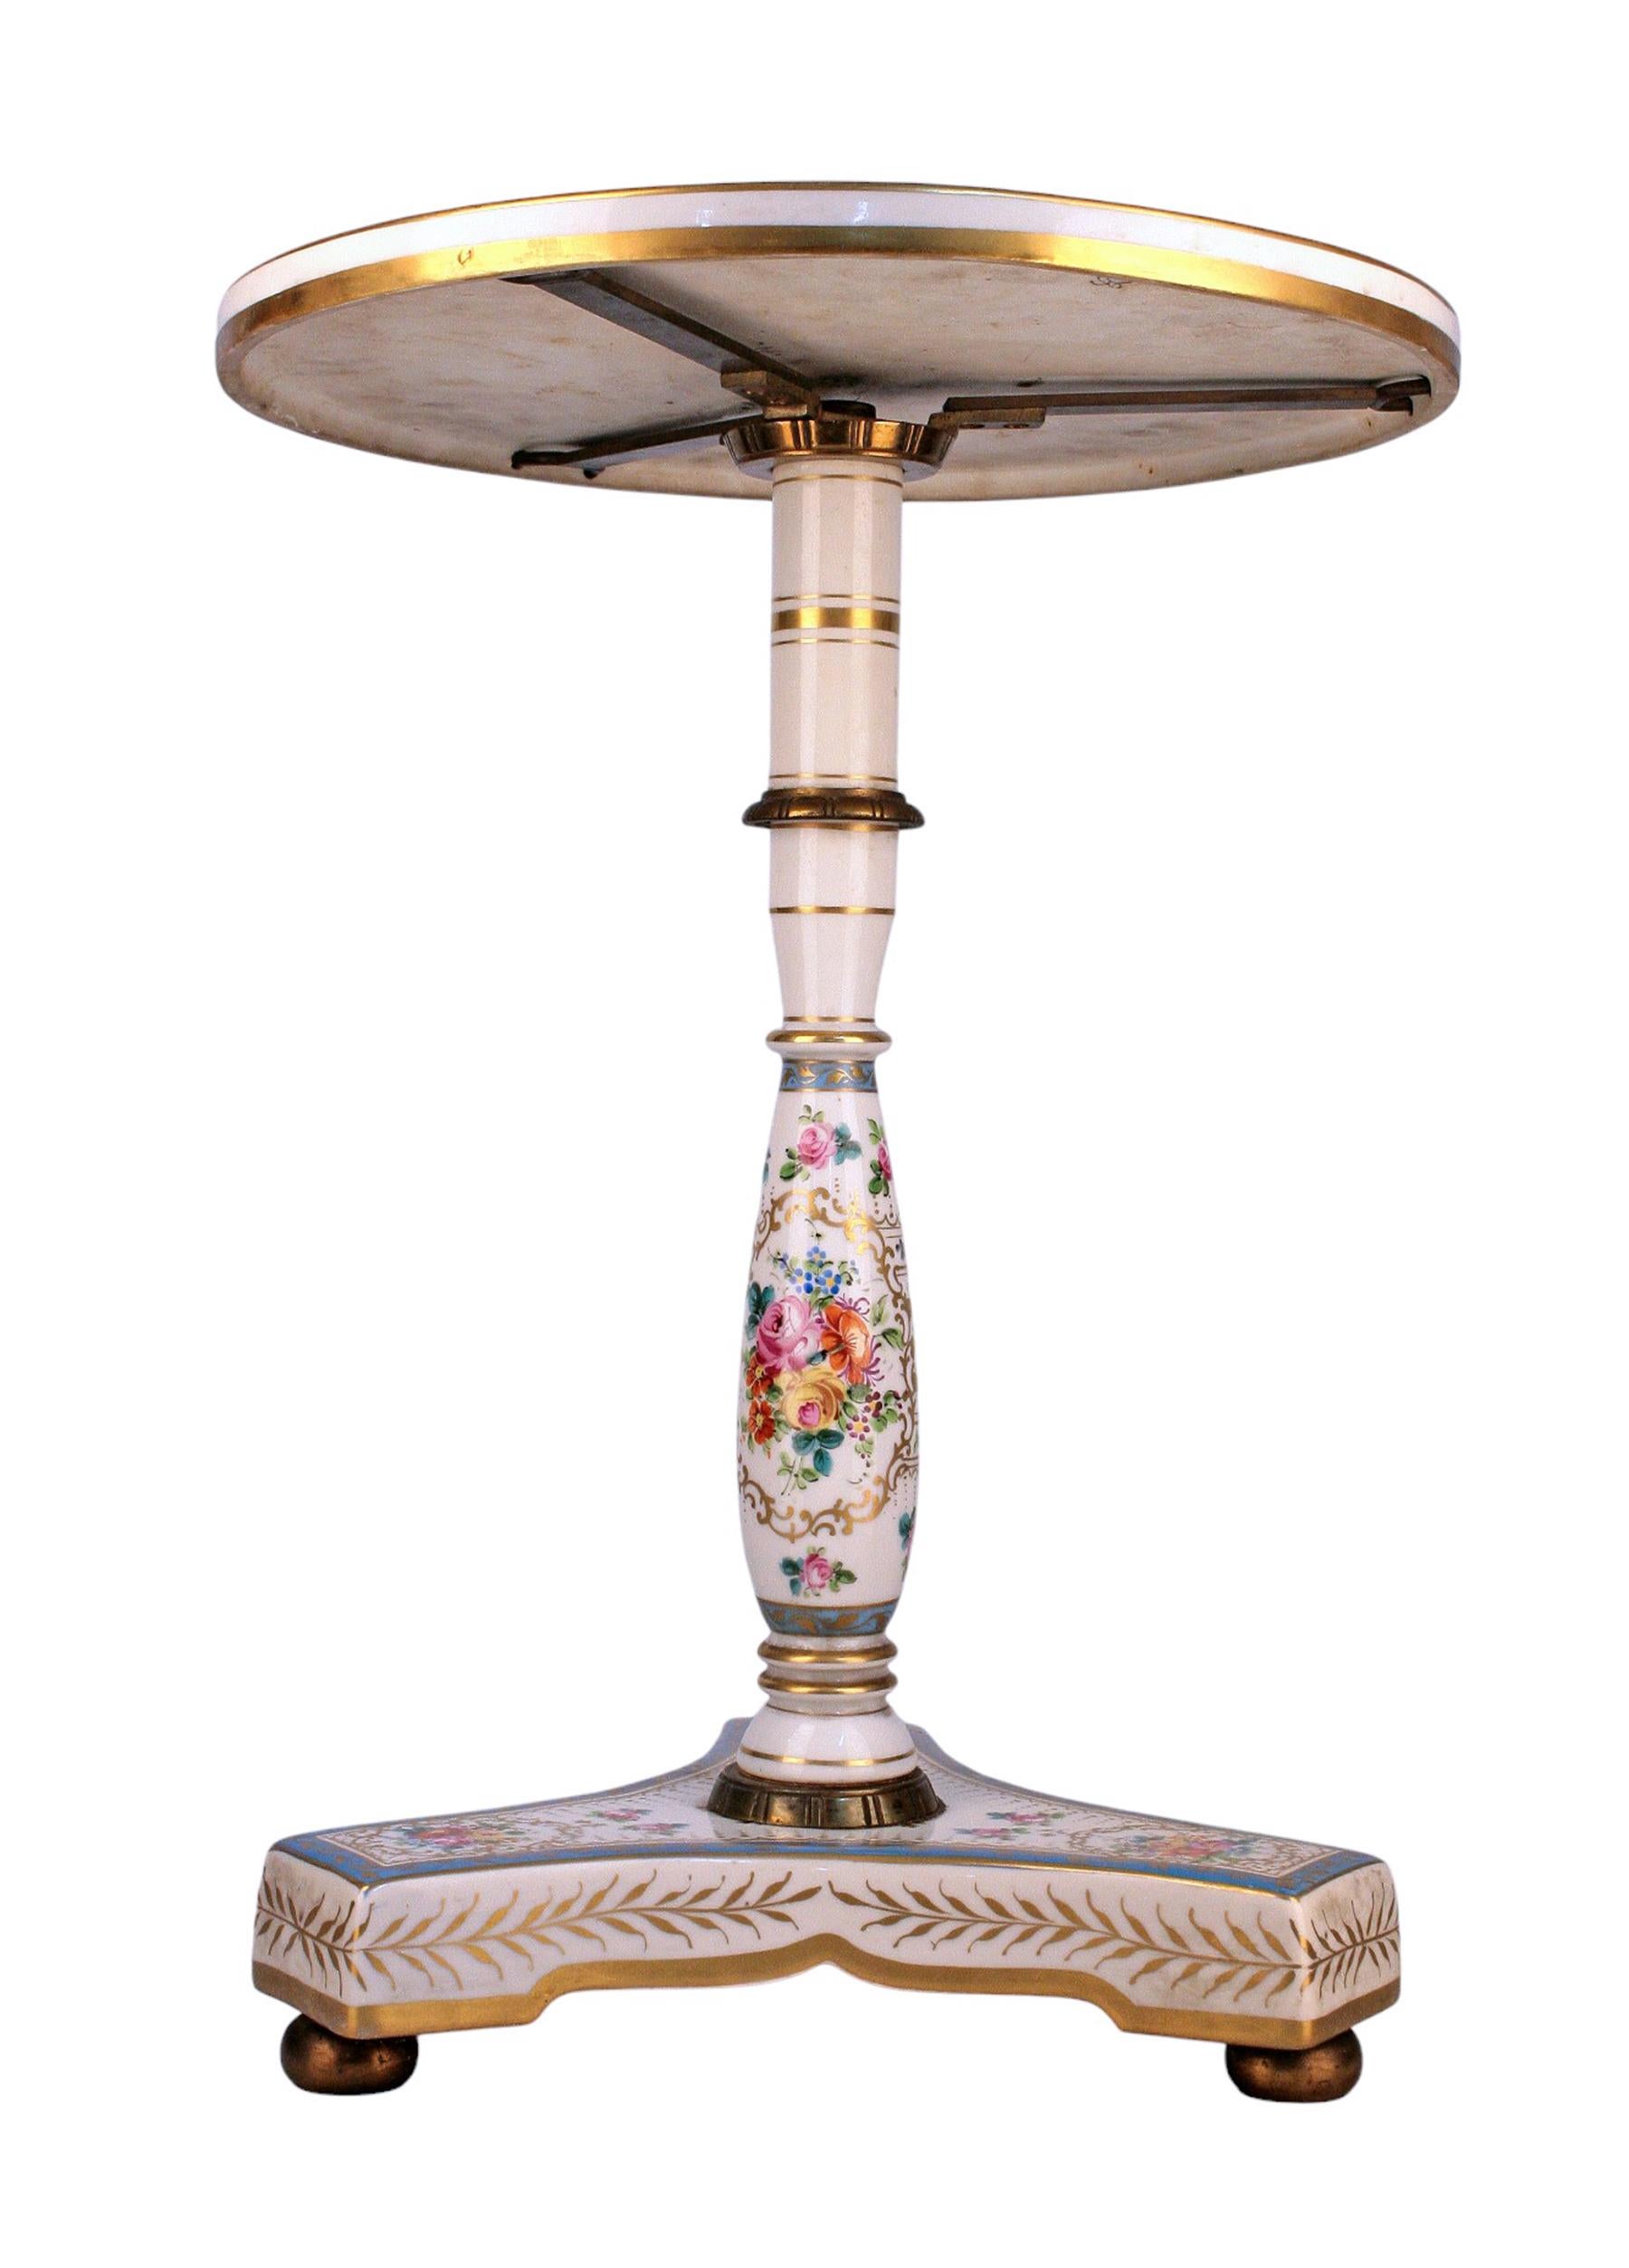 Cast Late 19th Century Napoleon III Painted Porcelain Pedestal Circular Table, France For Sale